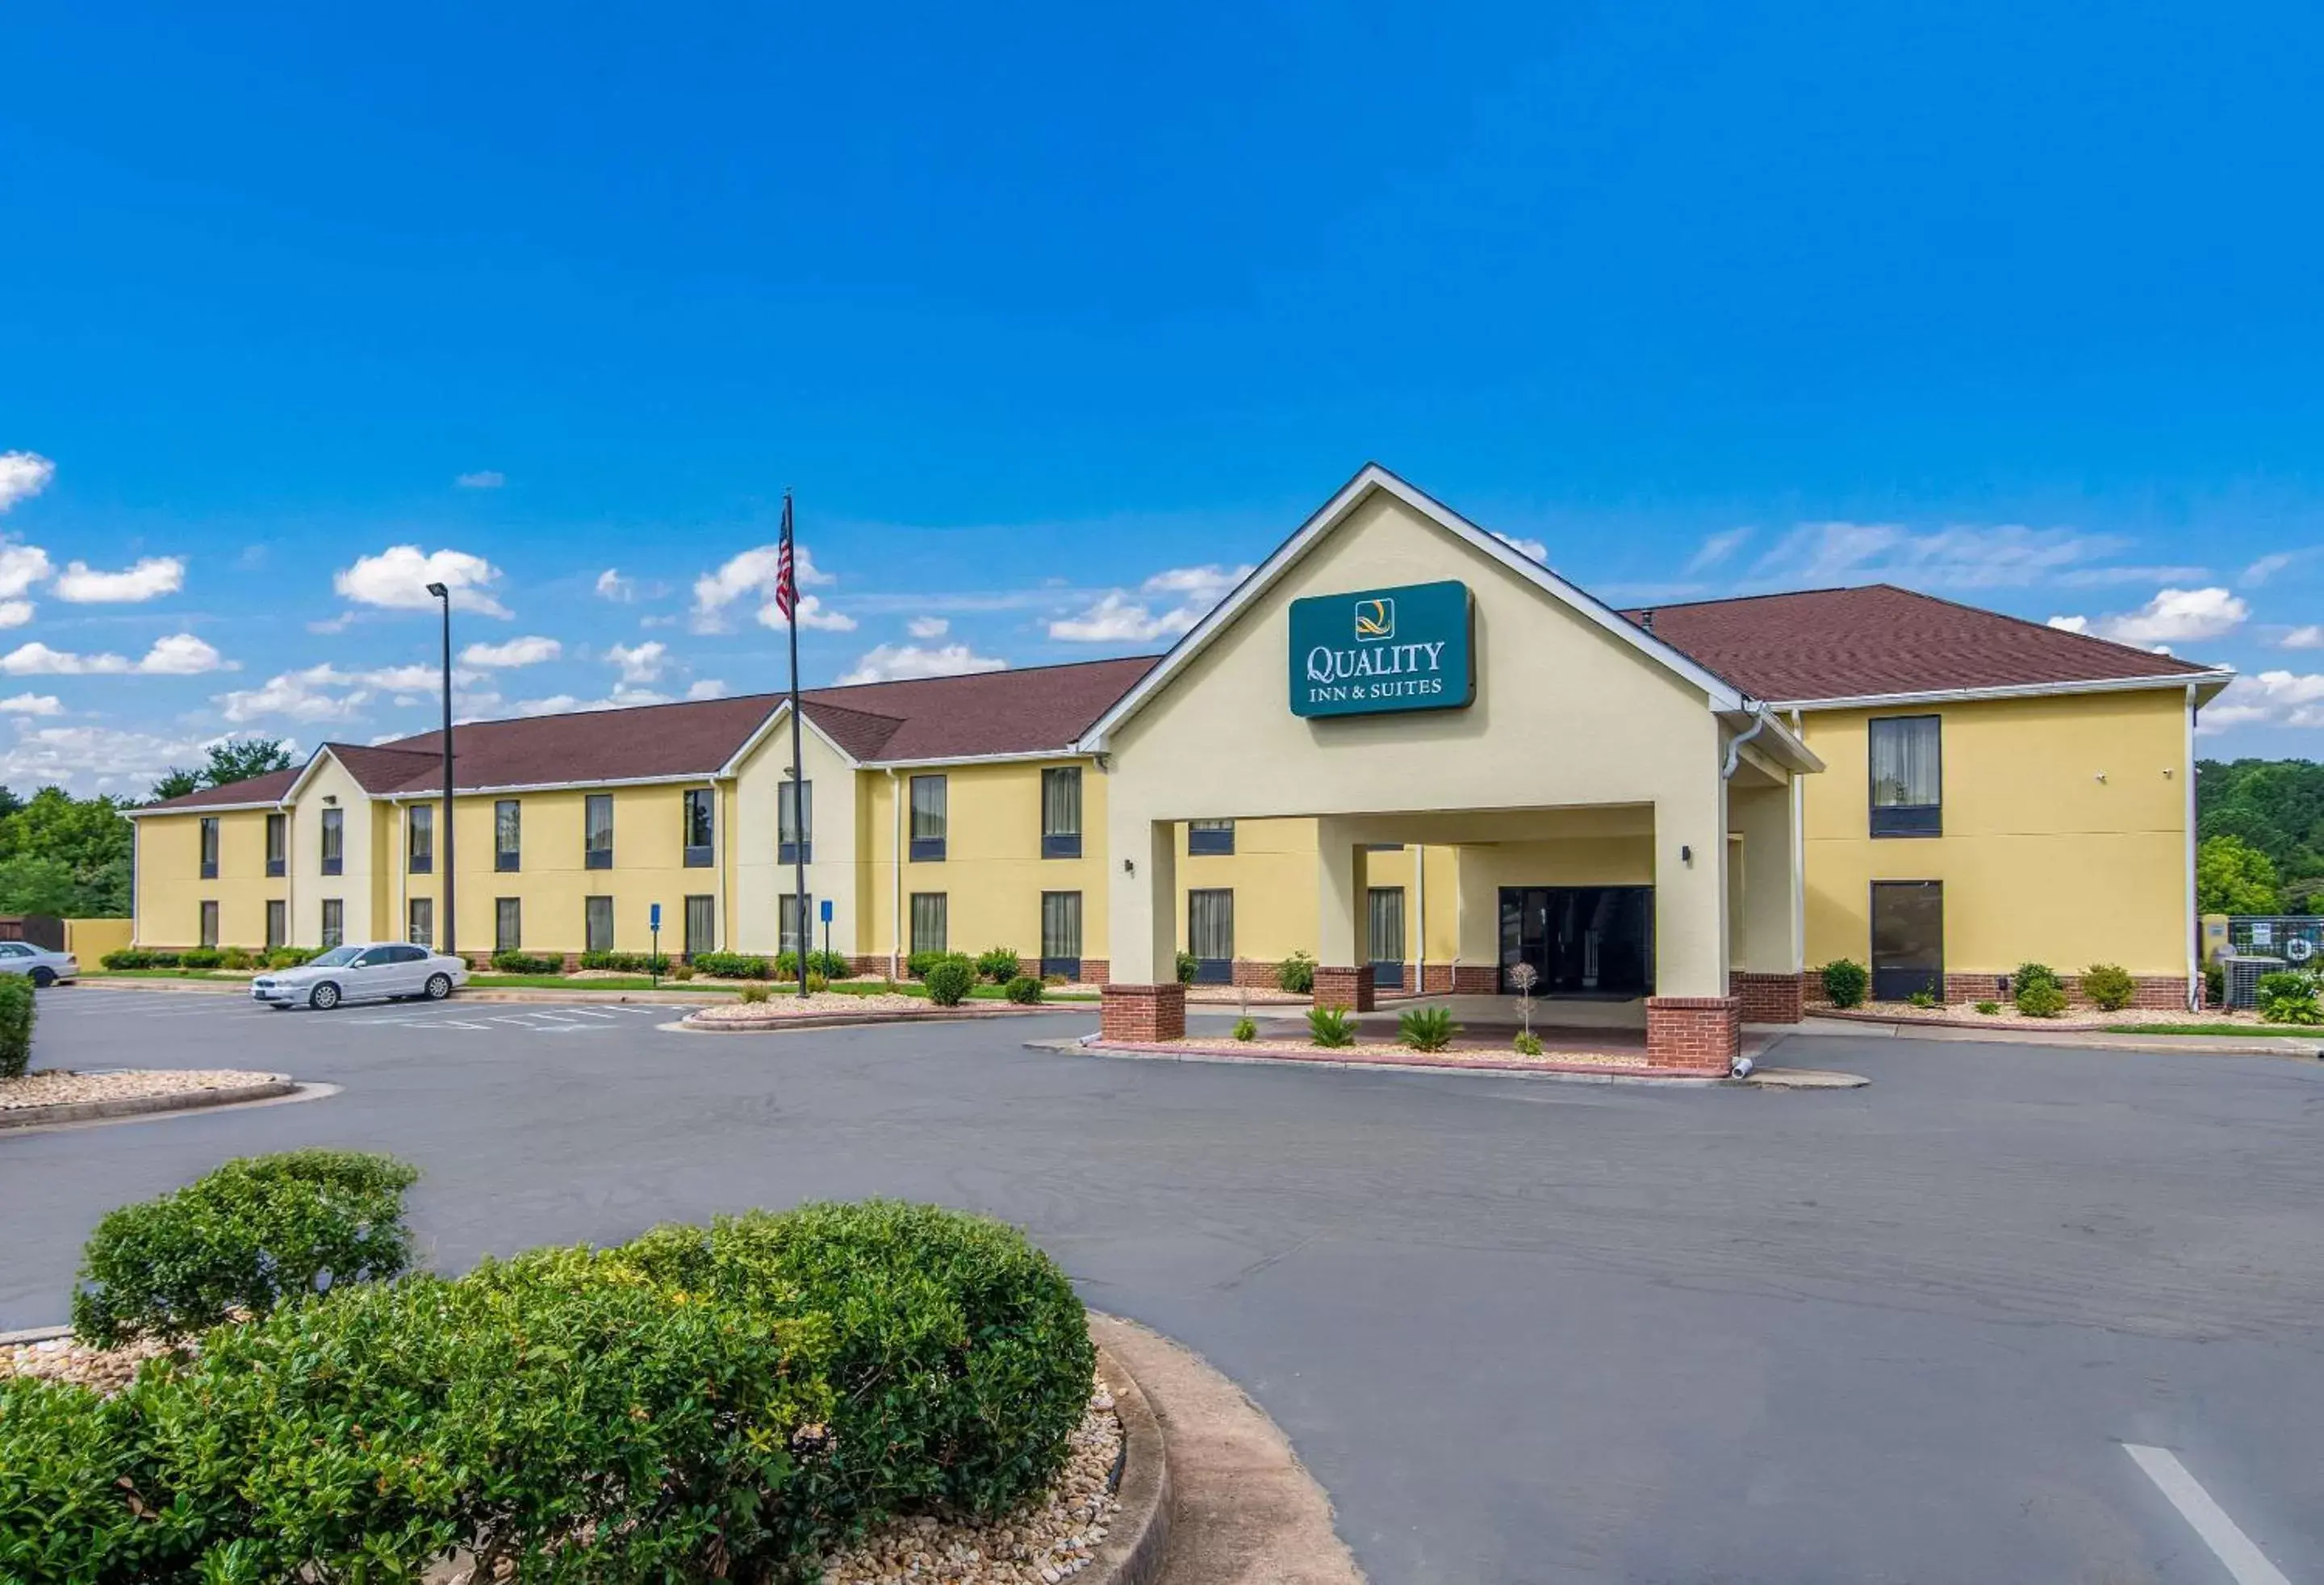 Property Building in Quality Inn & Suites Canton, GA